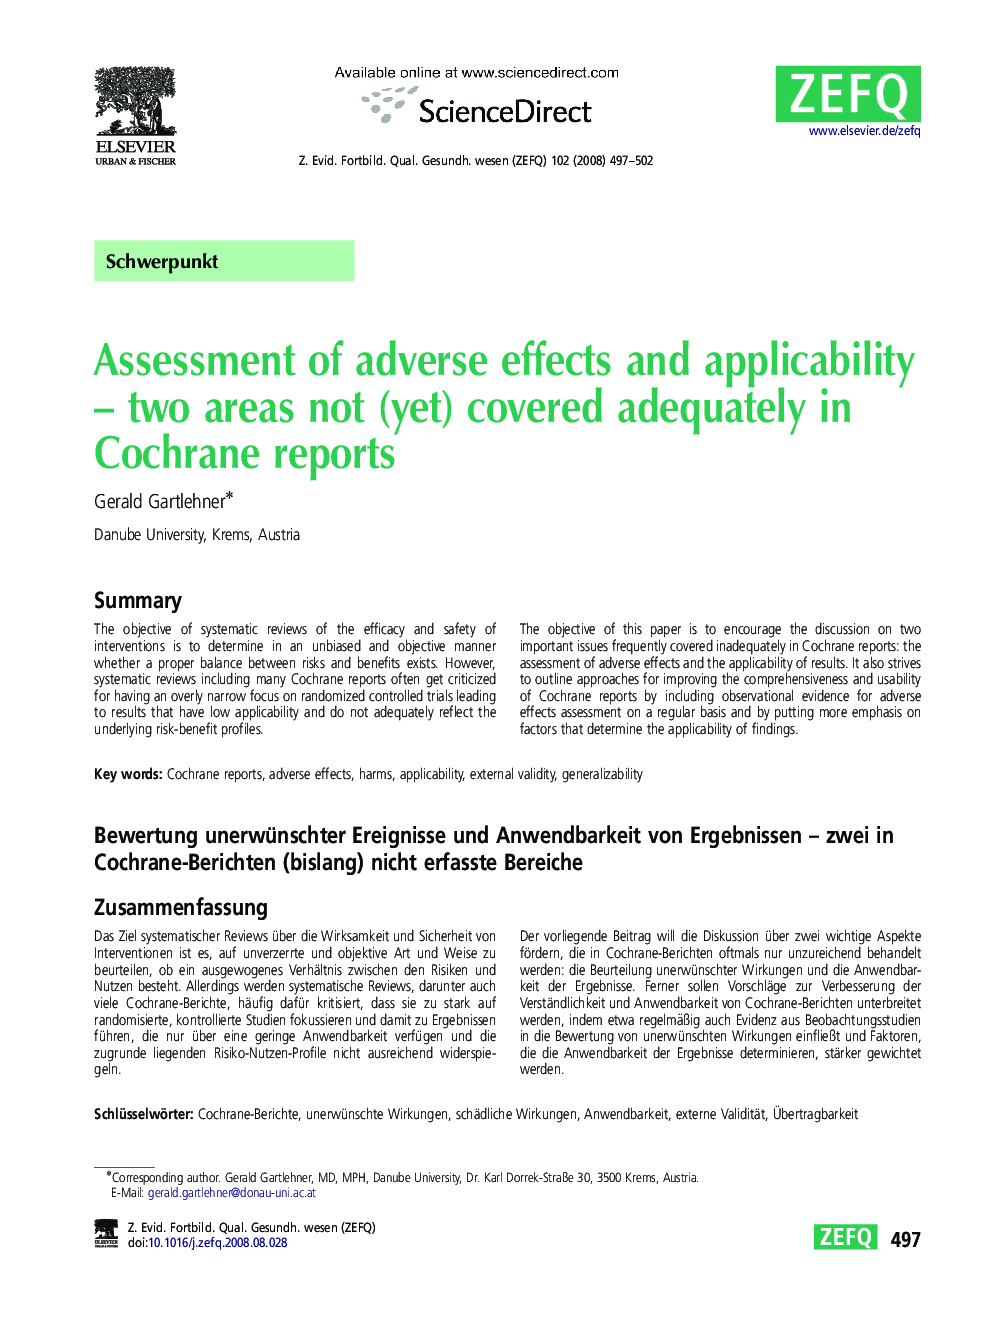 Assessment of adverse effects and applicability – two areas not (yet) covered adequately in Cochrane reports